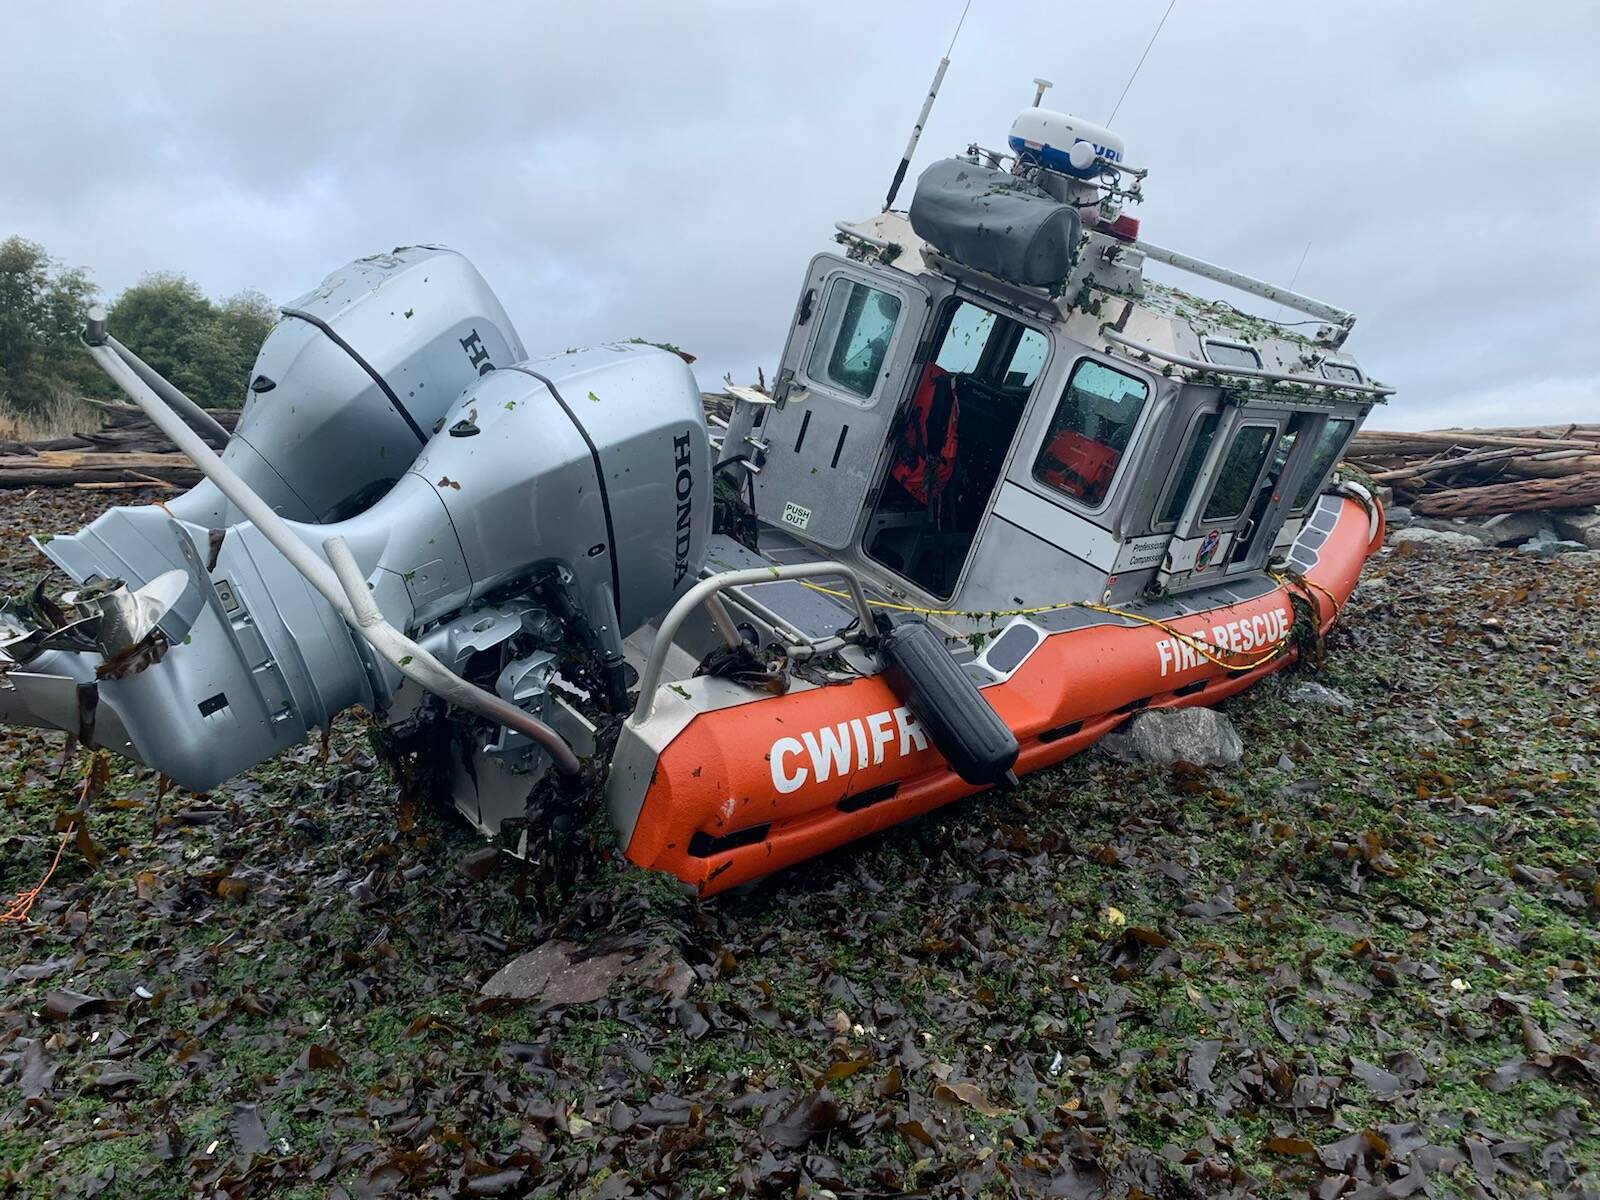 Photo provided
Two crew members aboard Central Whidbey Island Fire and Rescue’s SAFE boat, a marine rescue vessel, were uninjured after they jumped out as waves pounded it against the rocks and seawall in Greenbank. Fire Chief Ed Hartin said the boat lost steering during a storm.